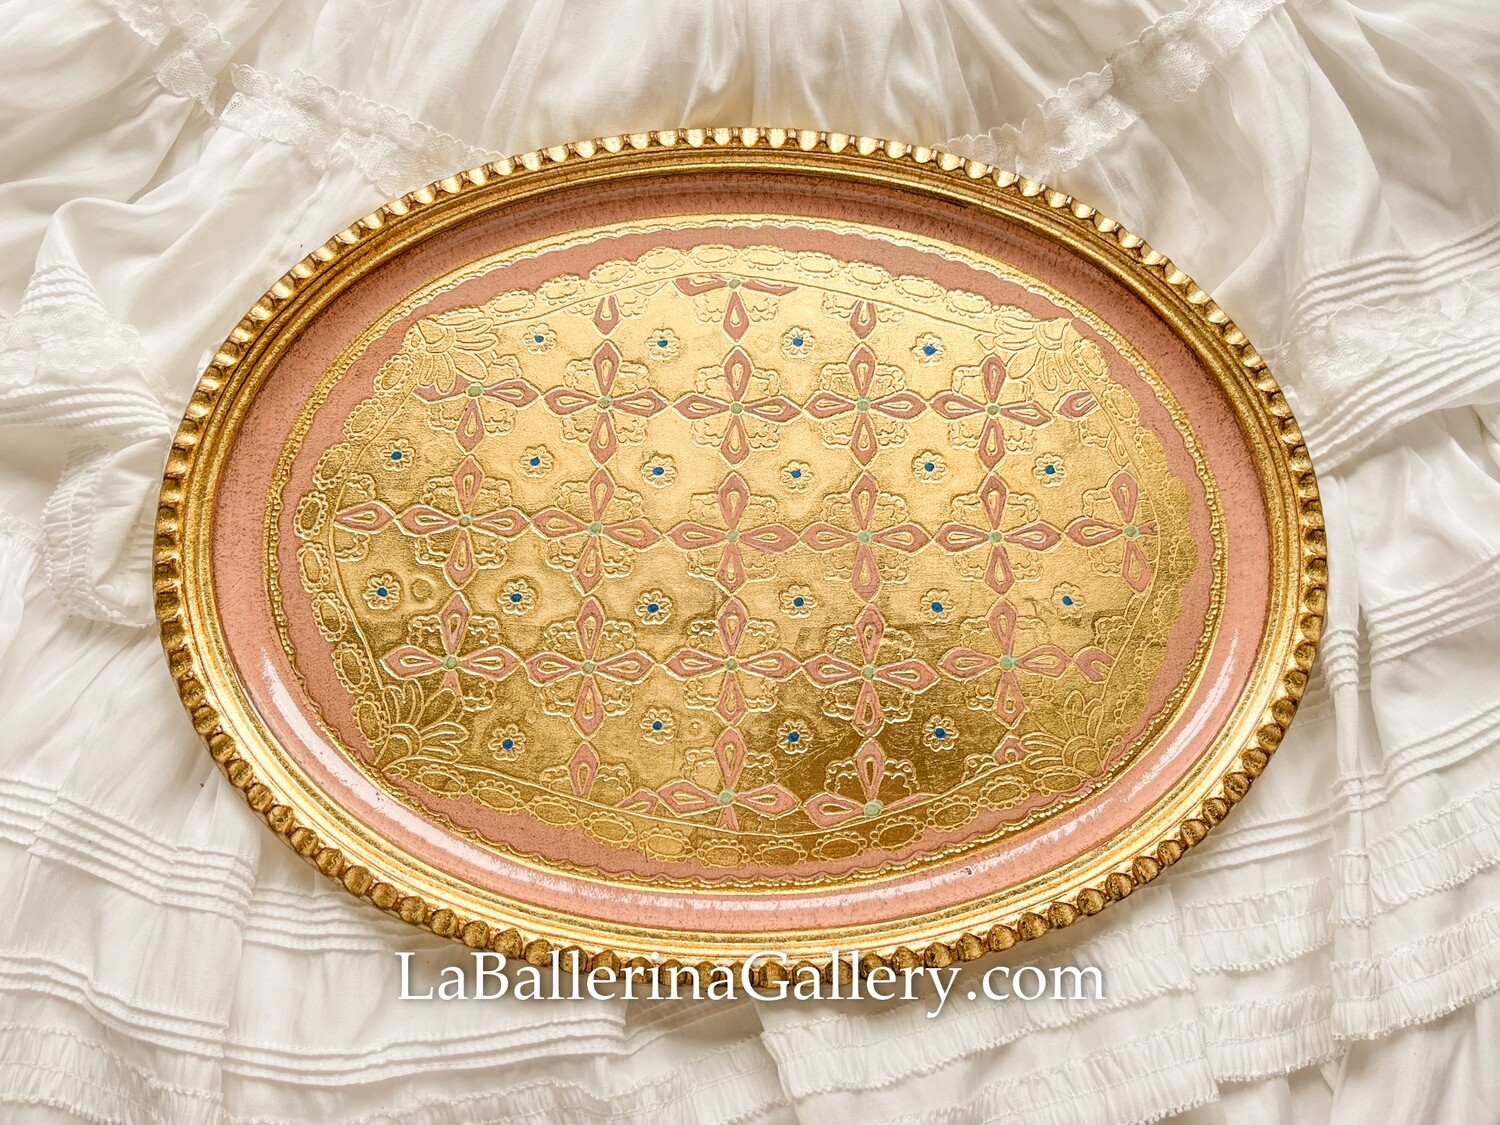 Florentine tray oval gold pink shabby chic baroque rococo wooden decorative tray tea board